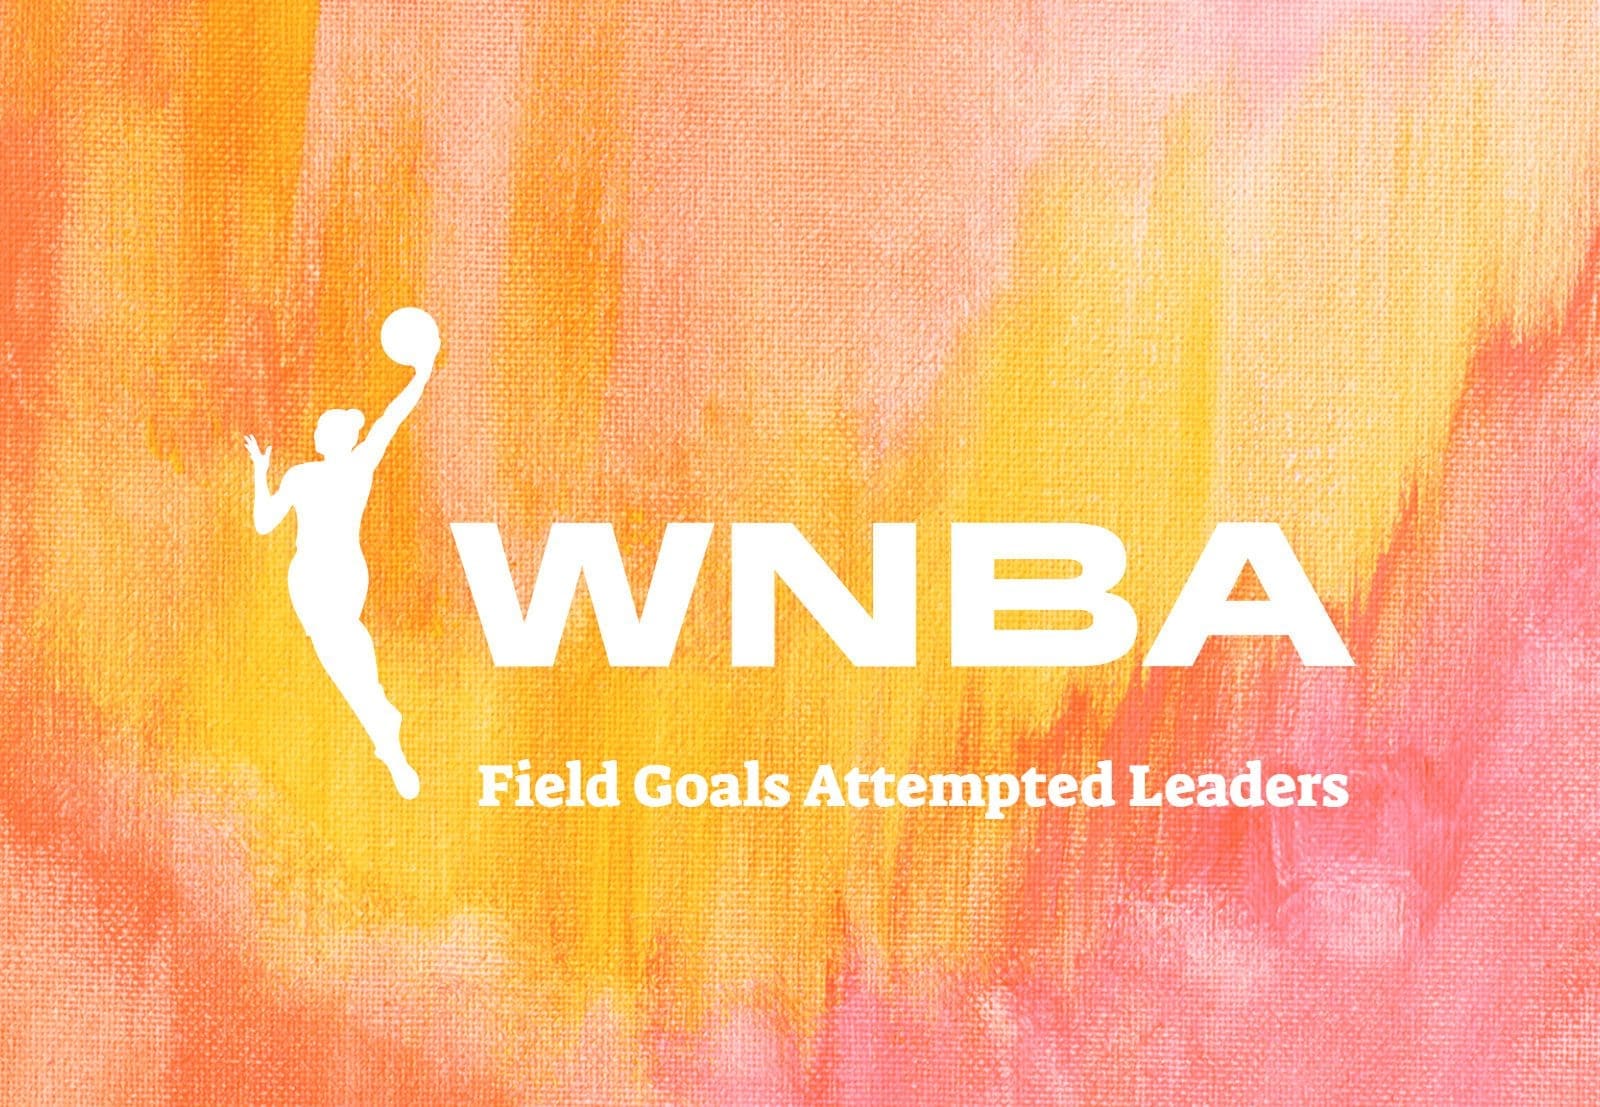 WNBA Field Goals Attempted Leaders